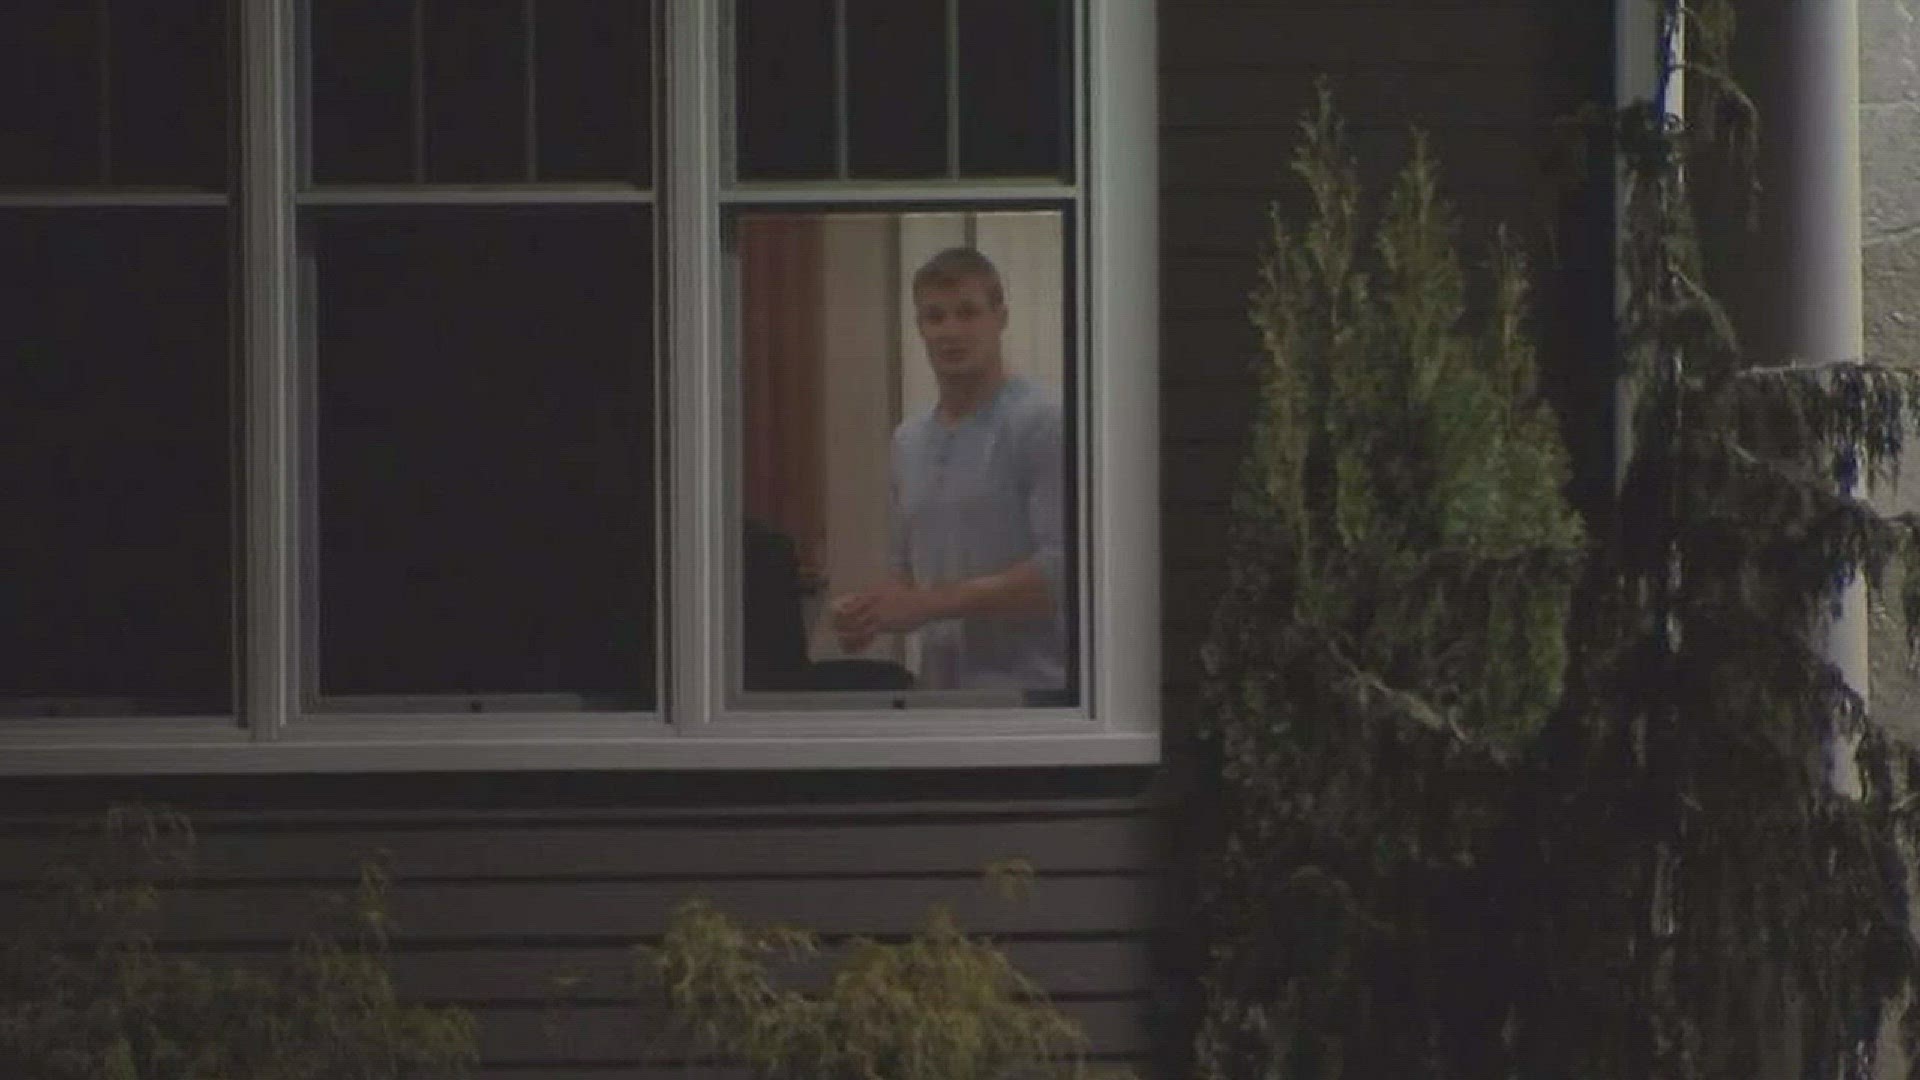 LISTEN: Gronkowski's 911 call after break-in at home